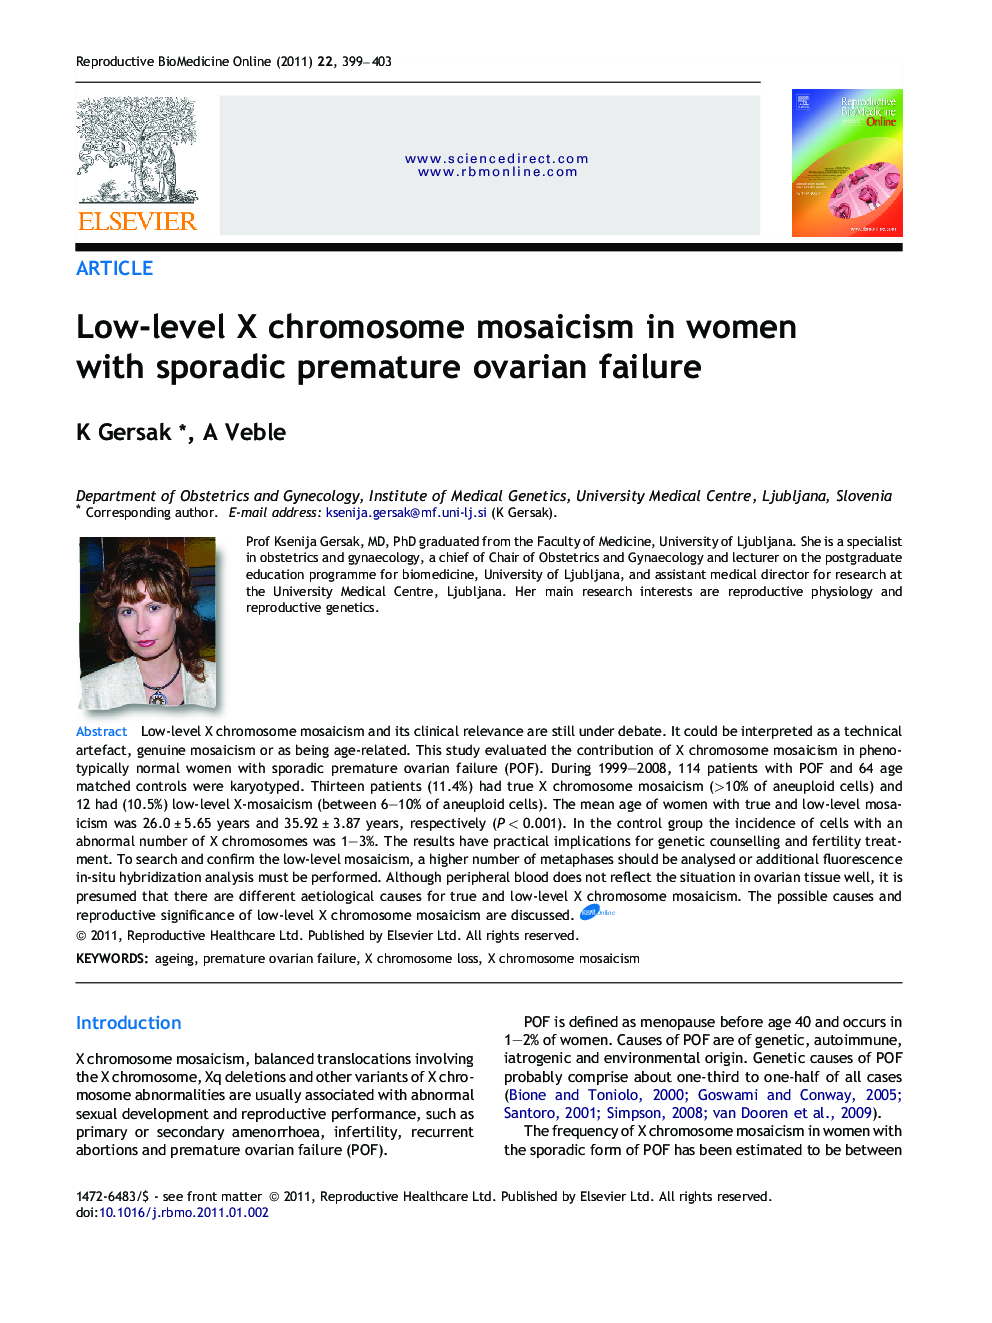 Low-level X chromosome mosaicism in women with sporadic premature ovarian failure 